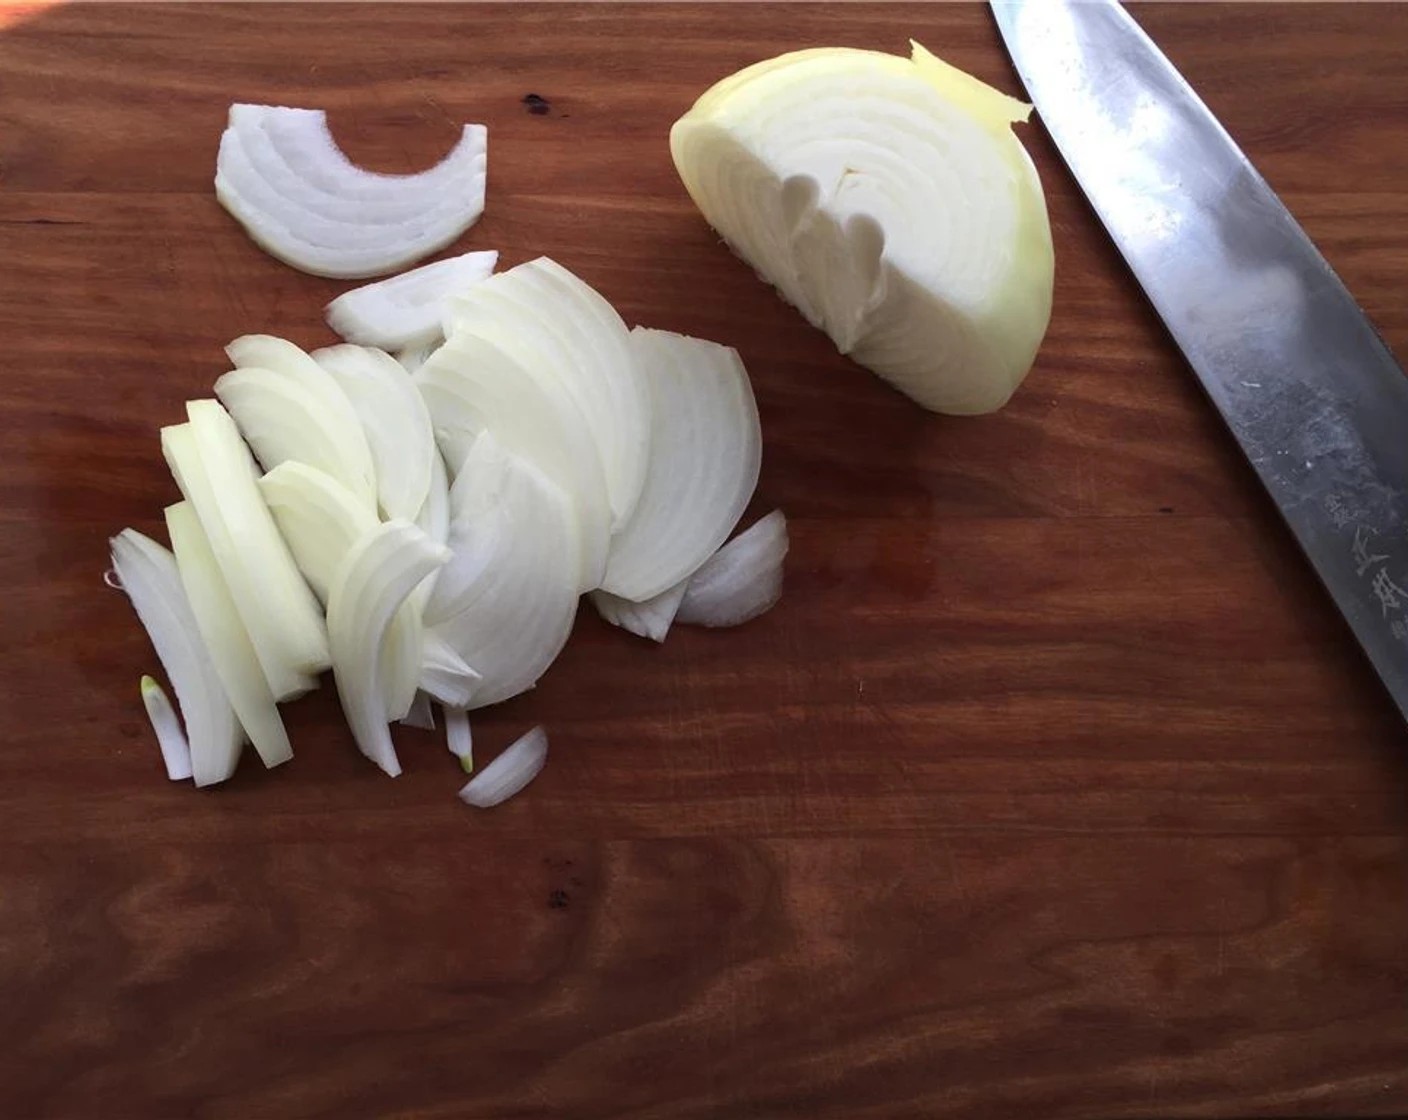 step 1 Your oven does not need preheating, saving you time and reducing energy costs. Let's start by slicing the Spanish Onion (1/2). Bring a small pot of water to boil for the potatoes.